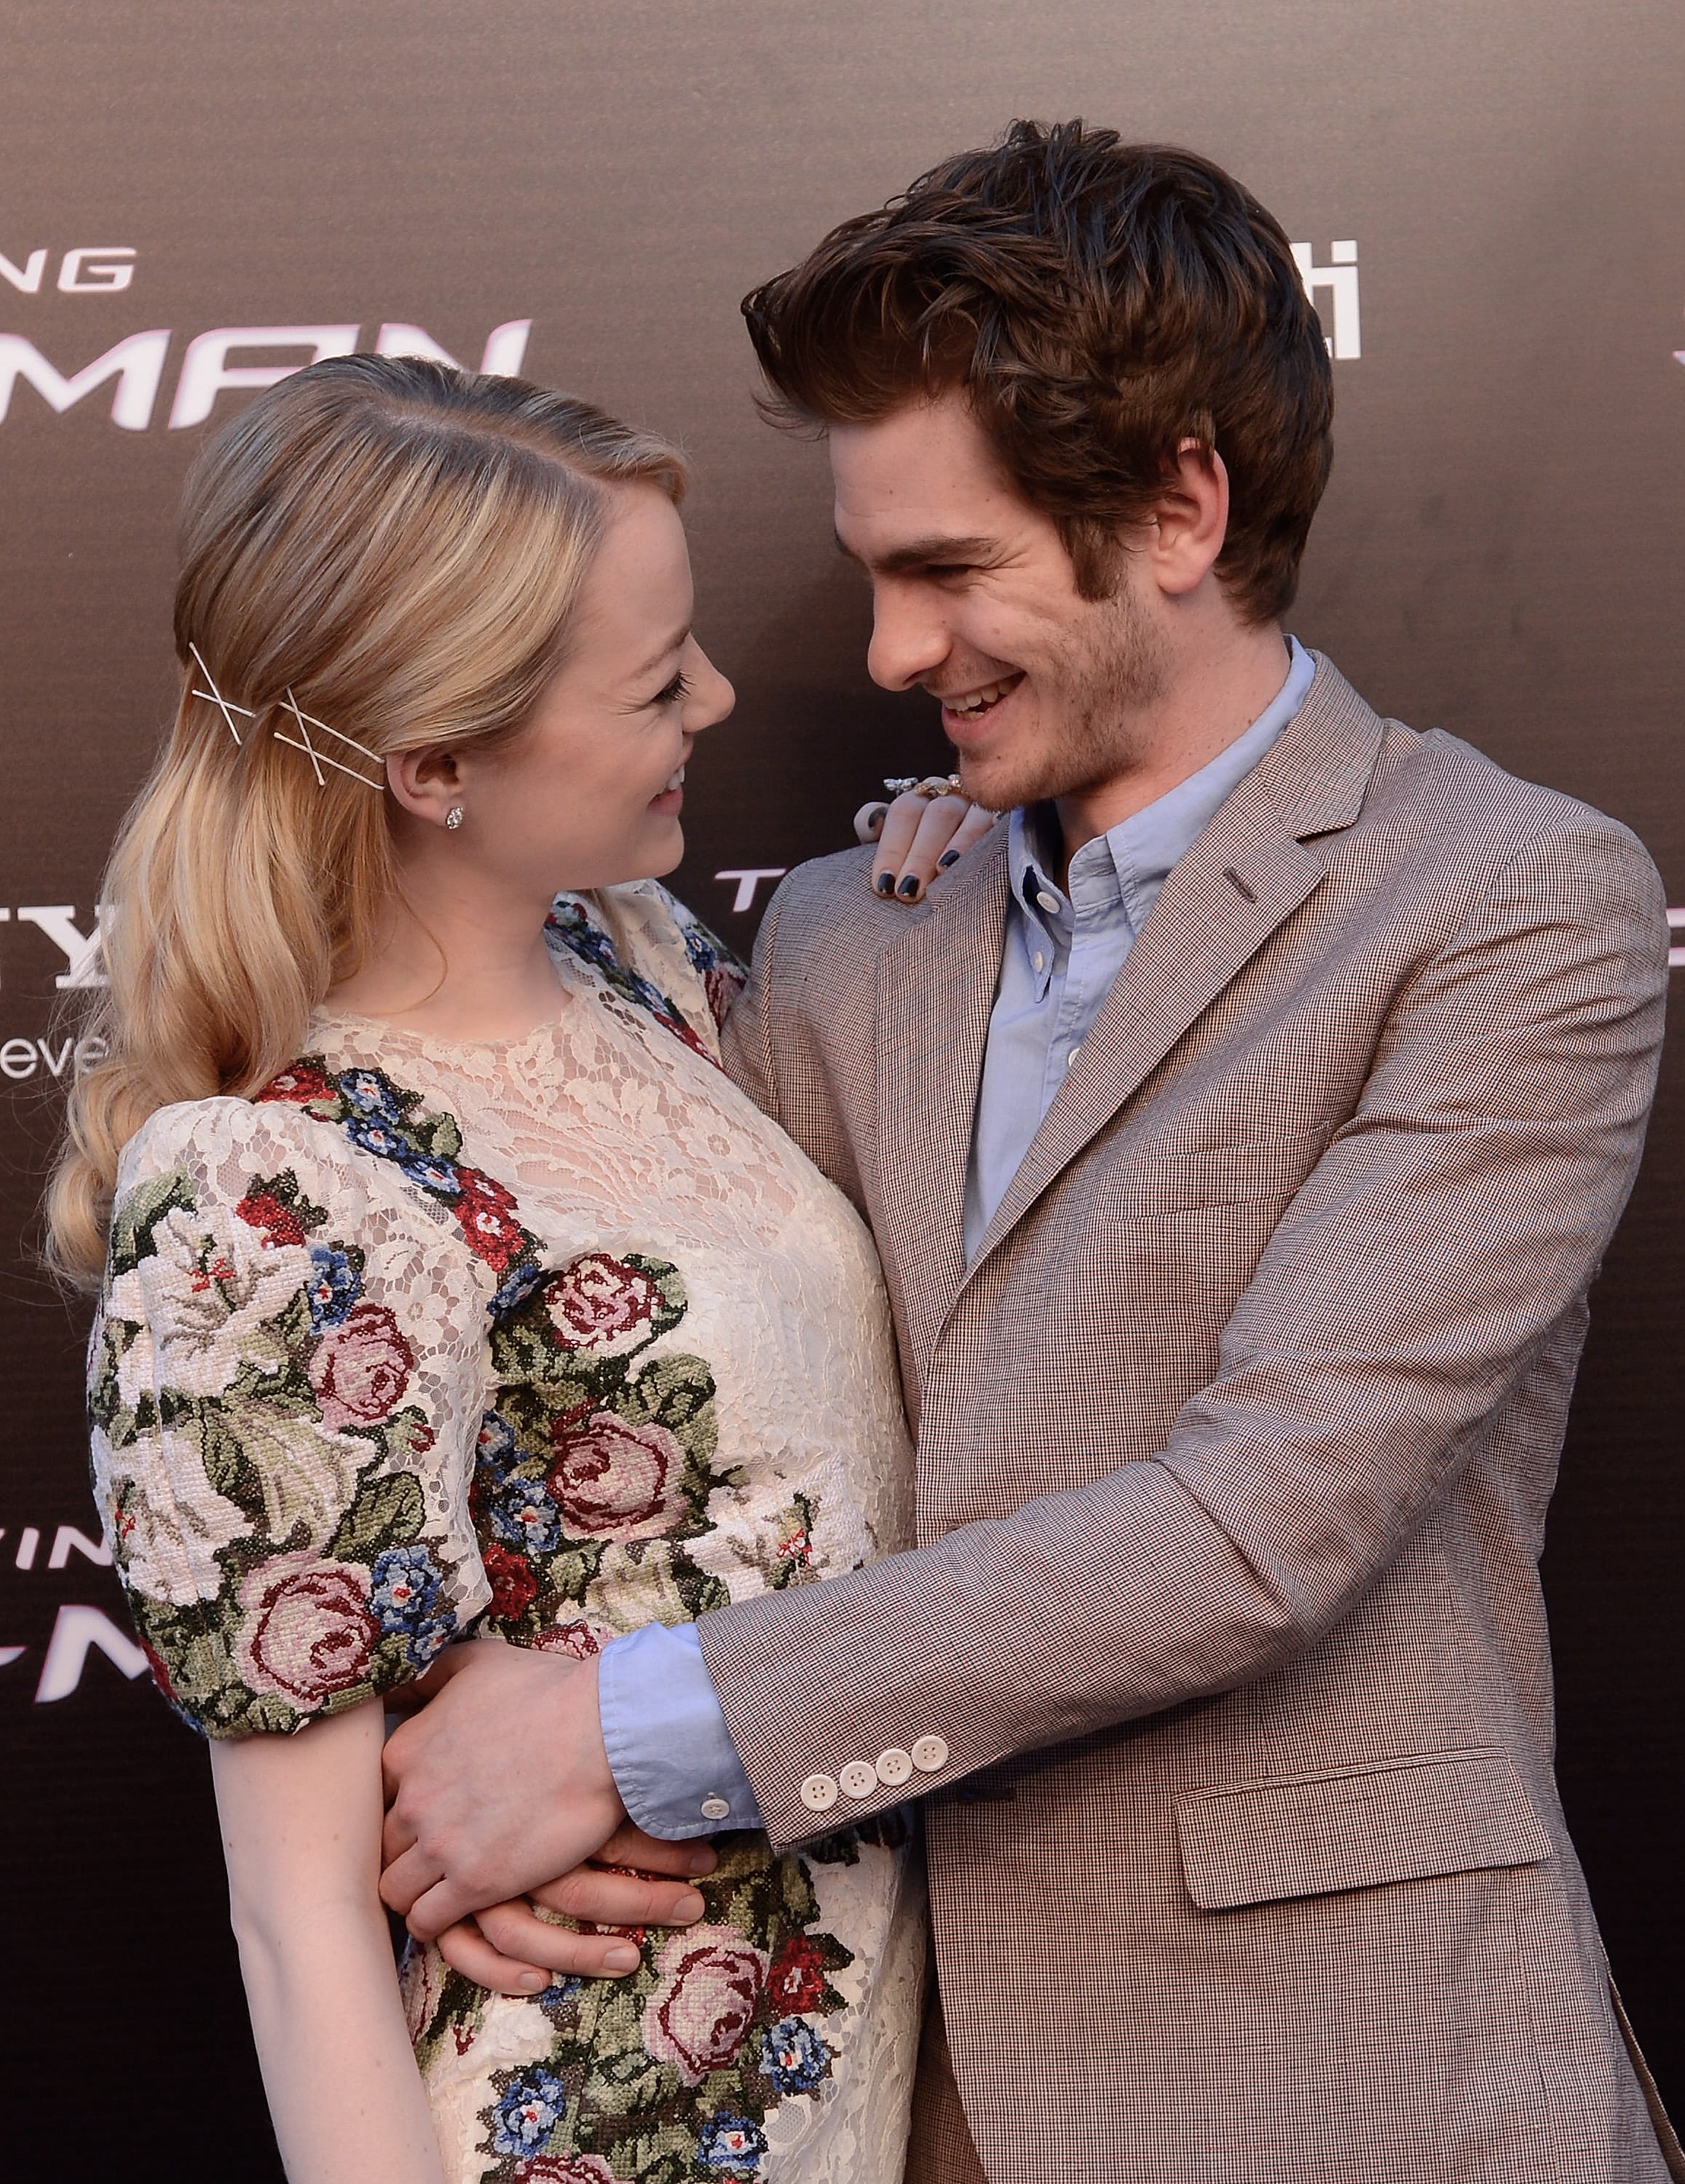 Emma Stone and Andrew Garfield Spider-Man 2 sequel confirmed